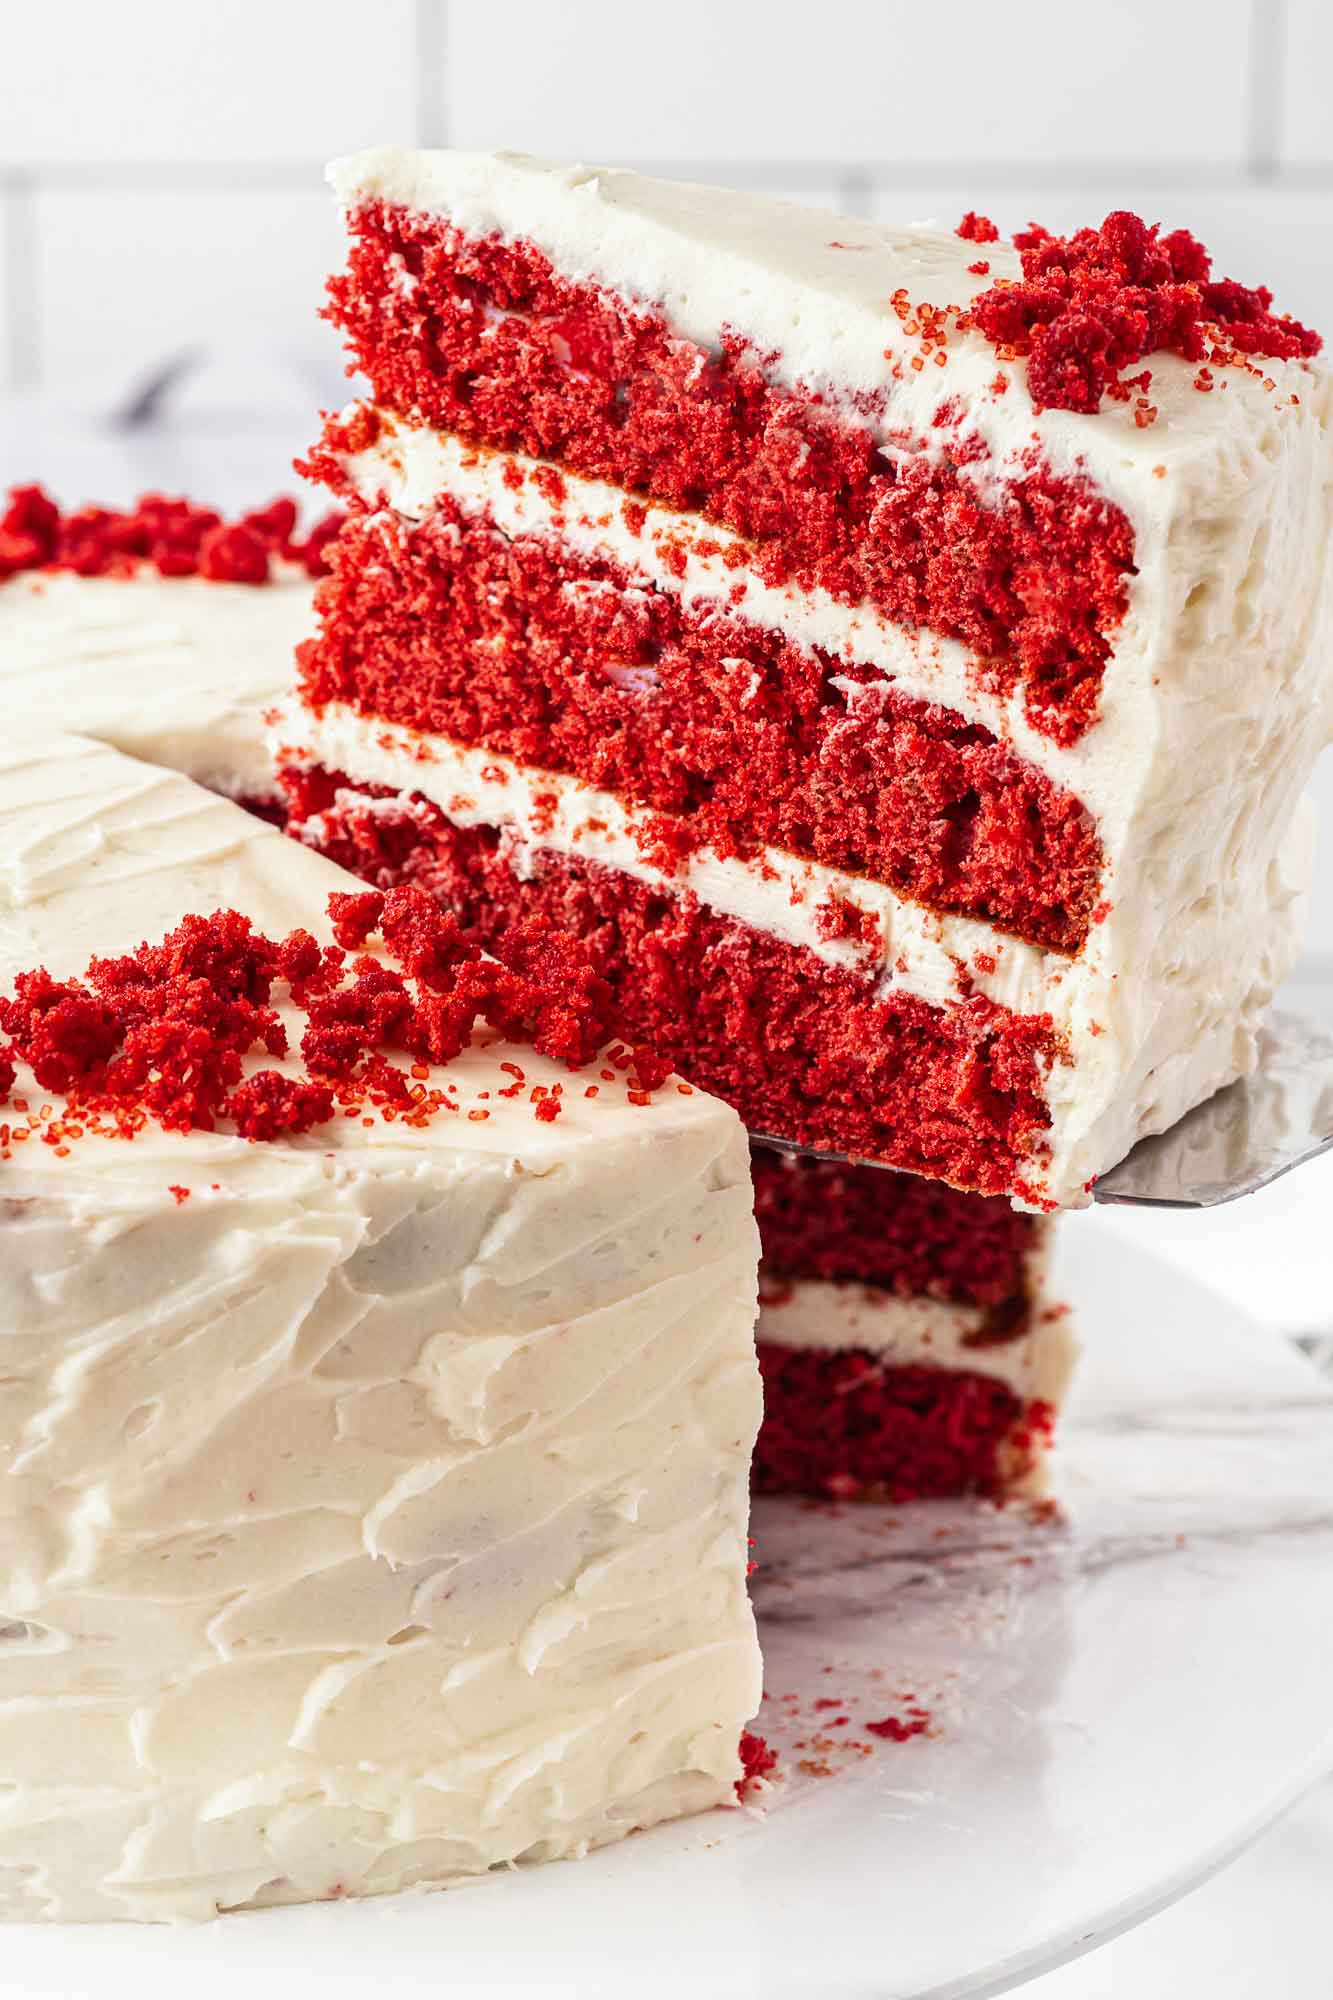 Taking a slice of red velvet cake from the whole cake.